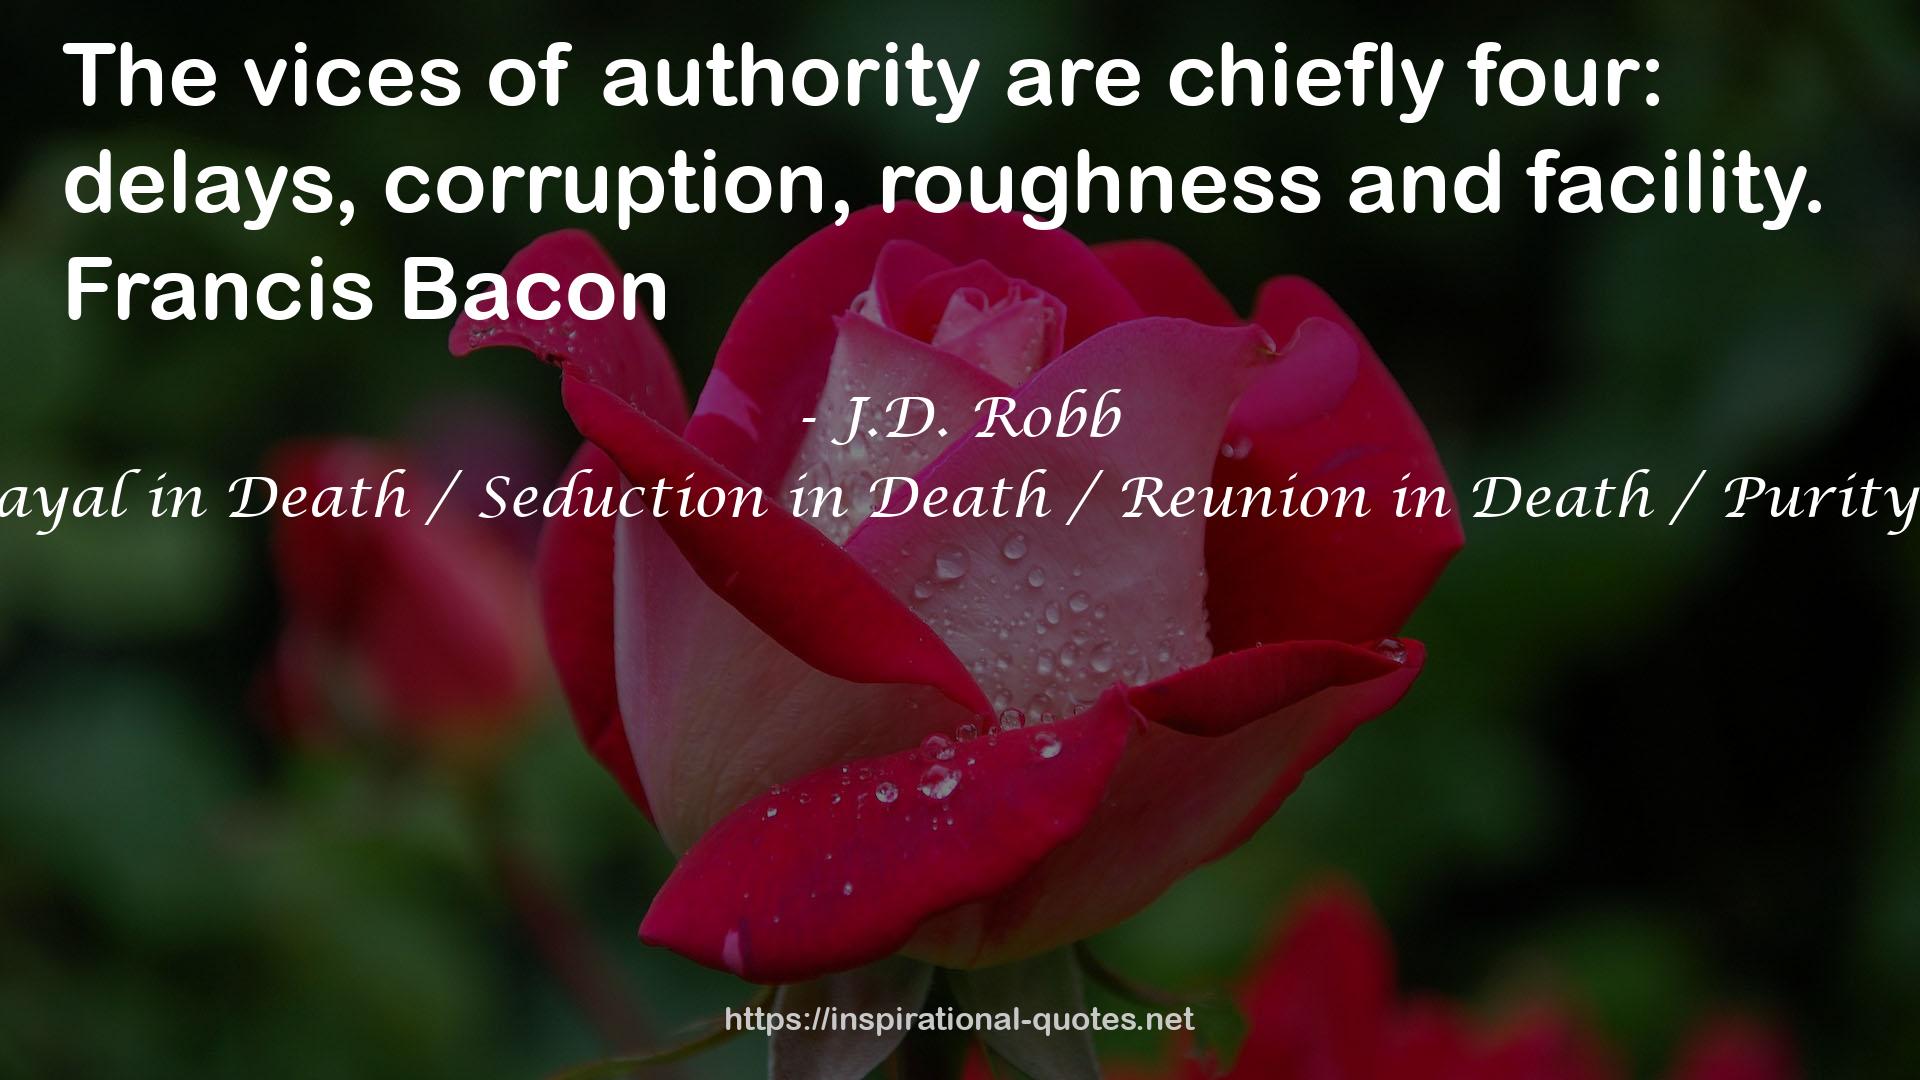 Judgment in Death / Betrayal in Death / Seduction in Death / Reunion in Death / Purity in Death (In Death #11-15) QUOTES